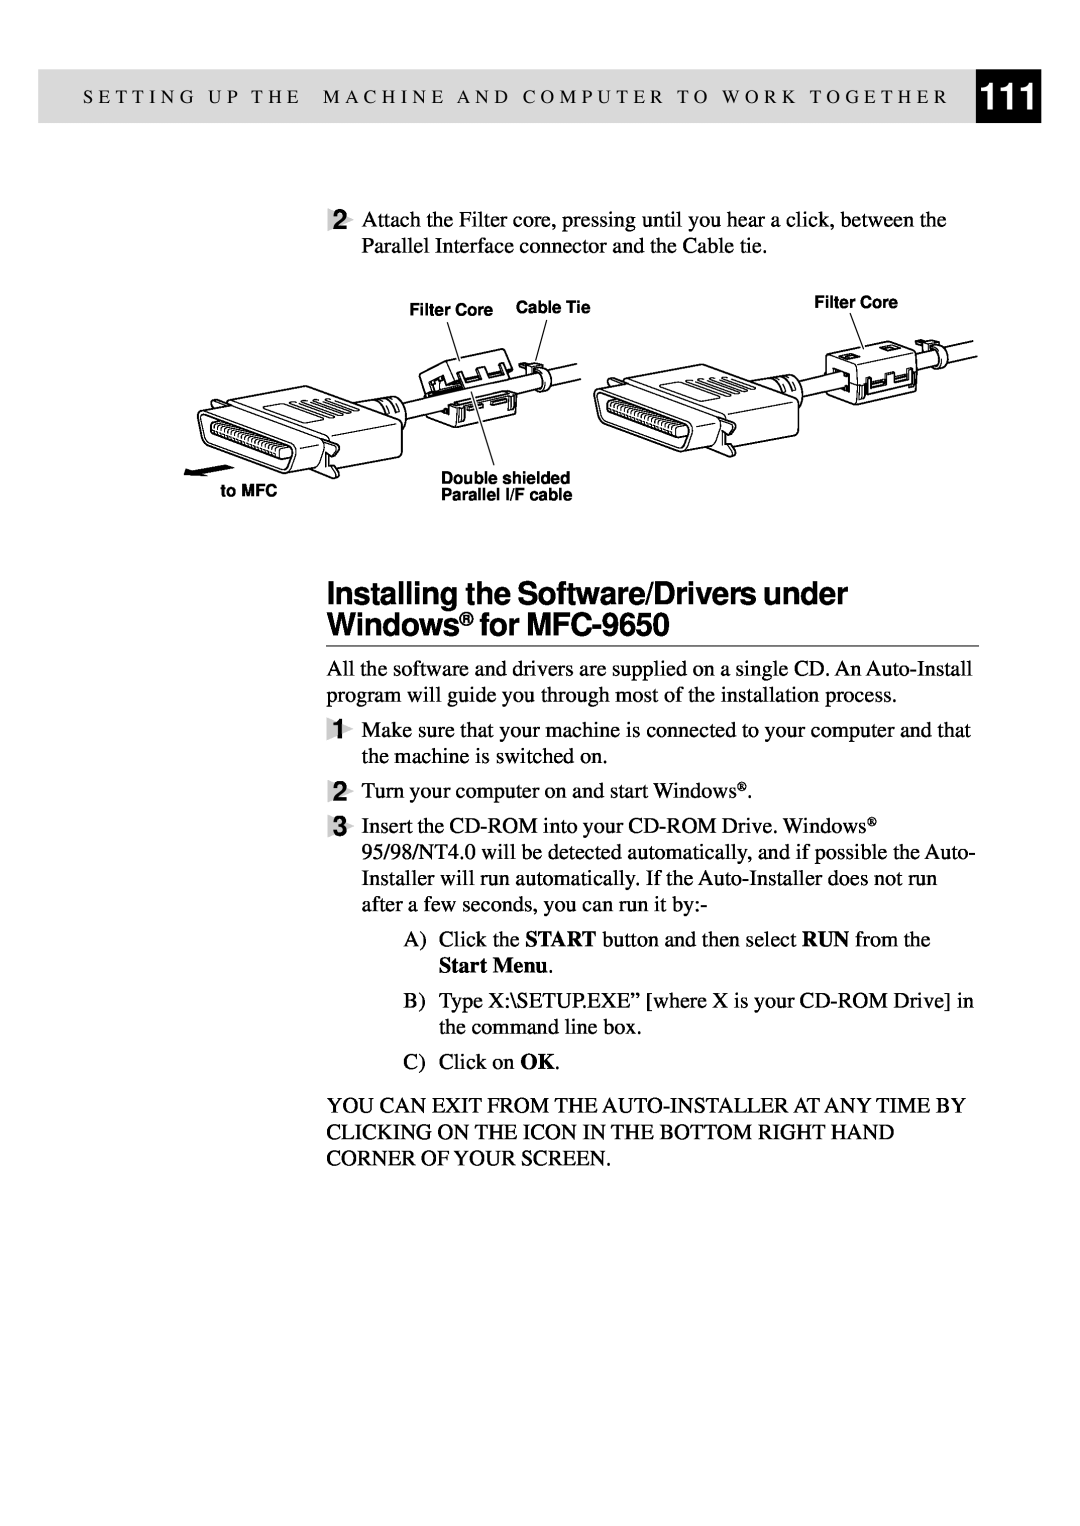 Brother FAX-8350P owner manual Installing the Software/Drivers under Windows for MFC-9650 